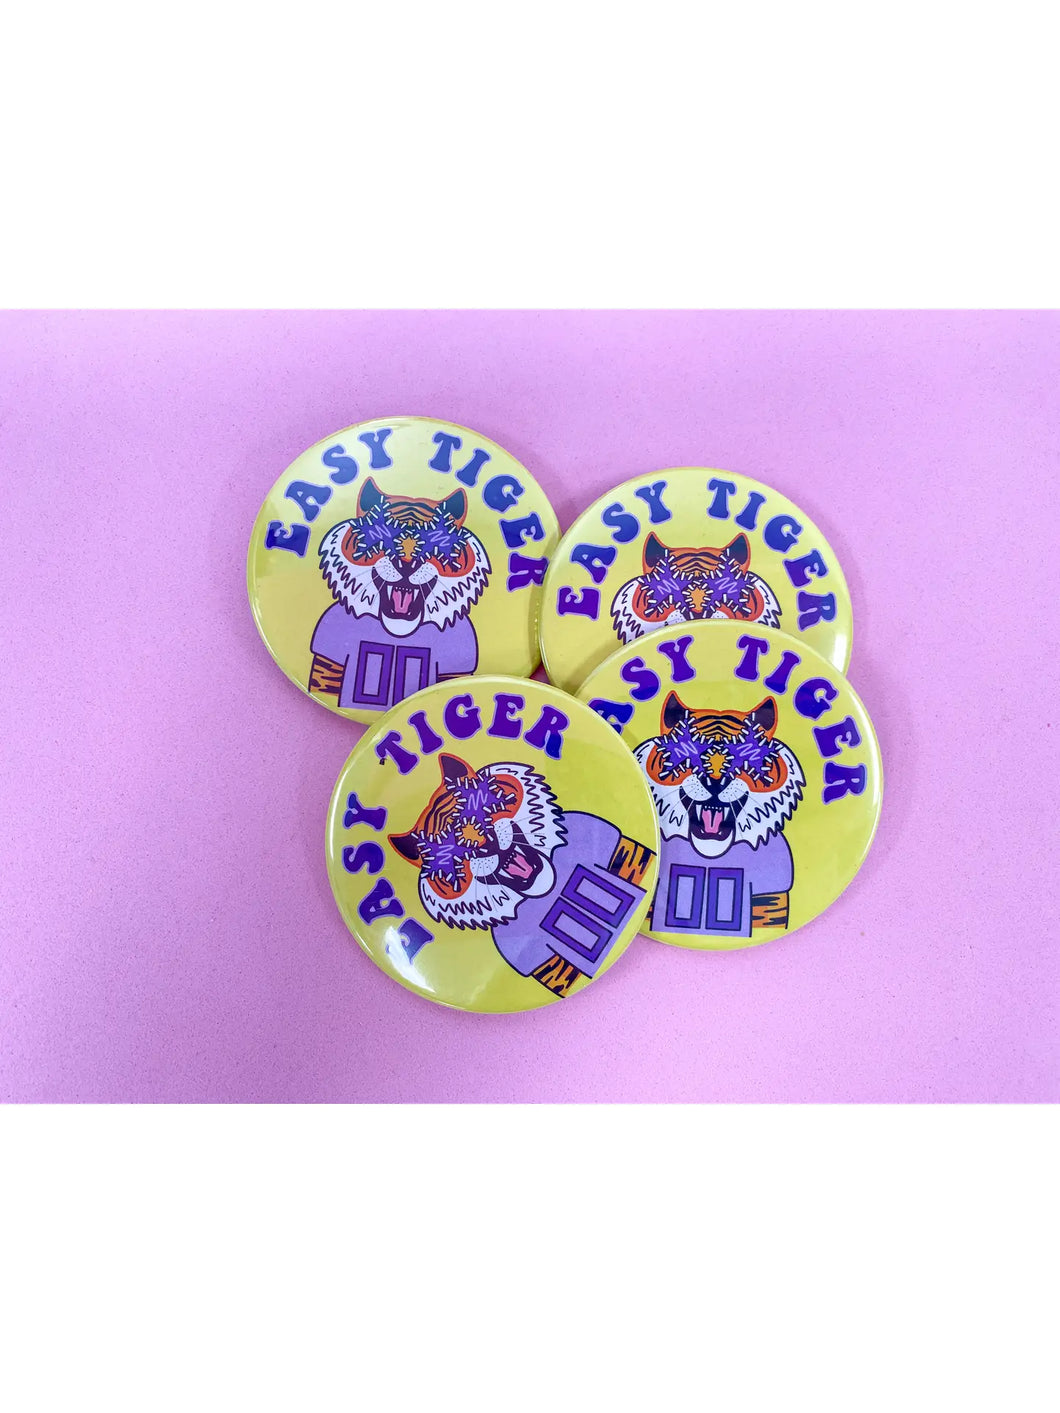 Easy Tiger Gameday Buttons